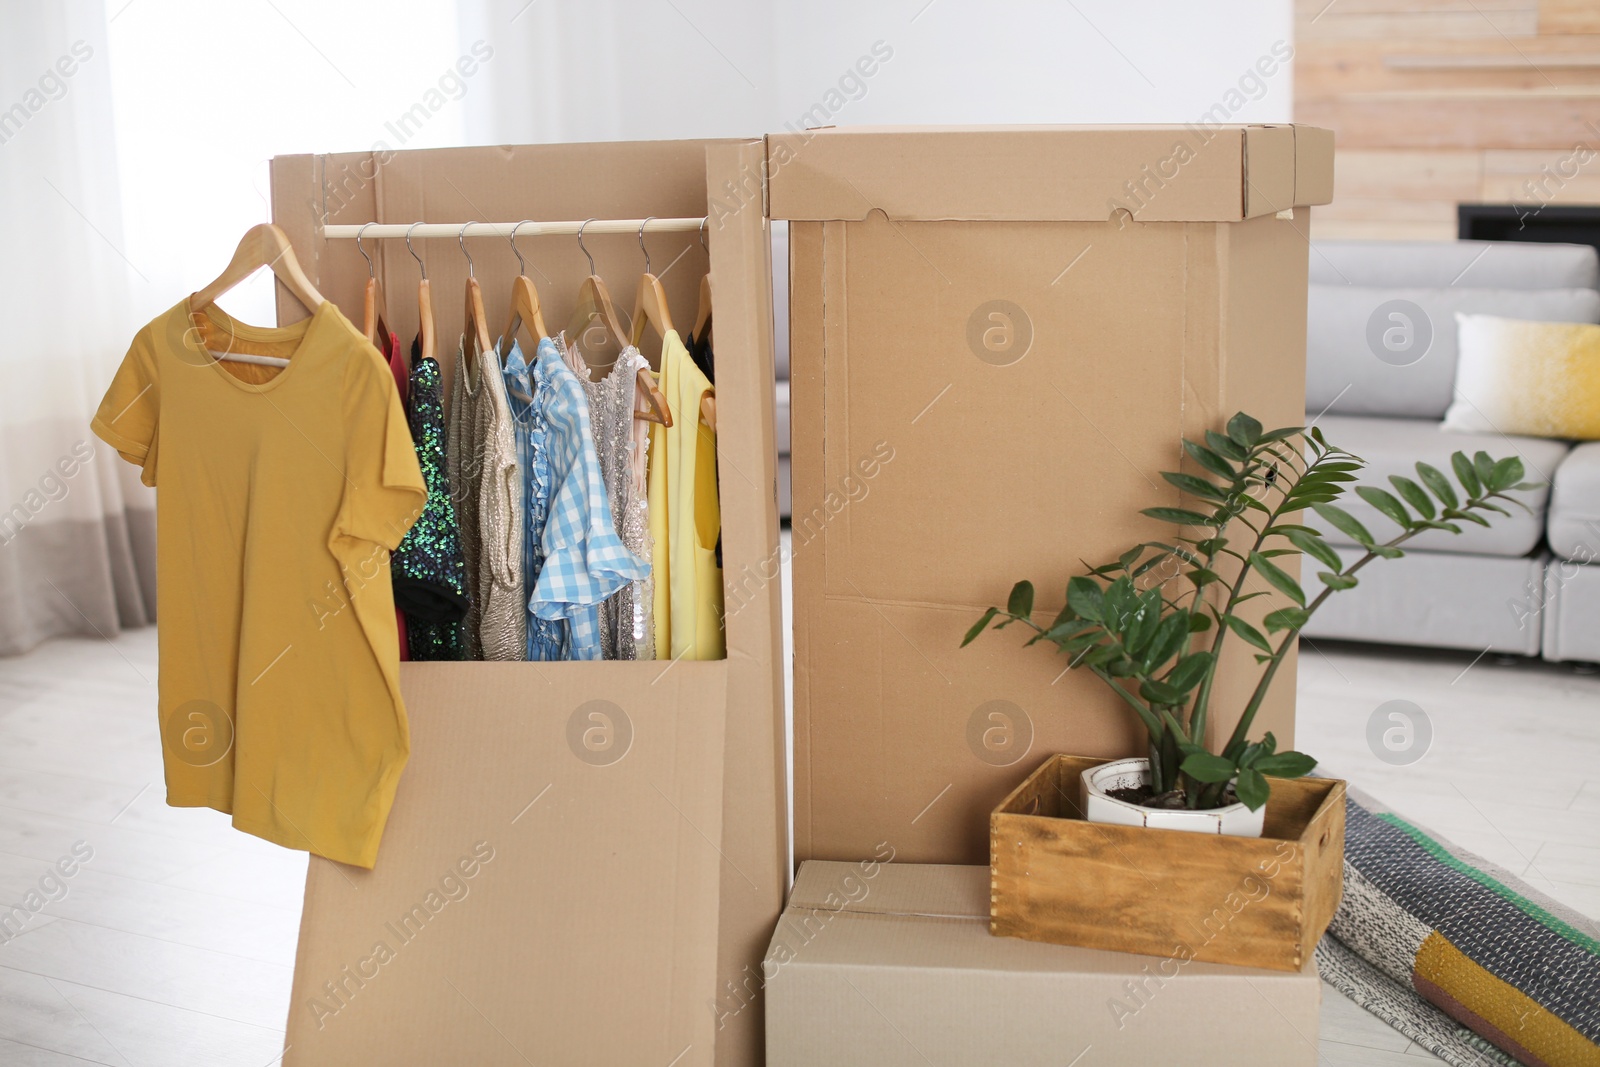 Photo of Cardboard wardrobe boxes with clothes on hangers, houseplant and carpet in living room